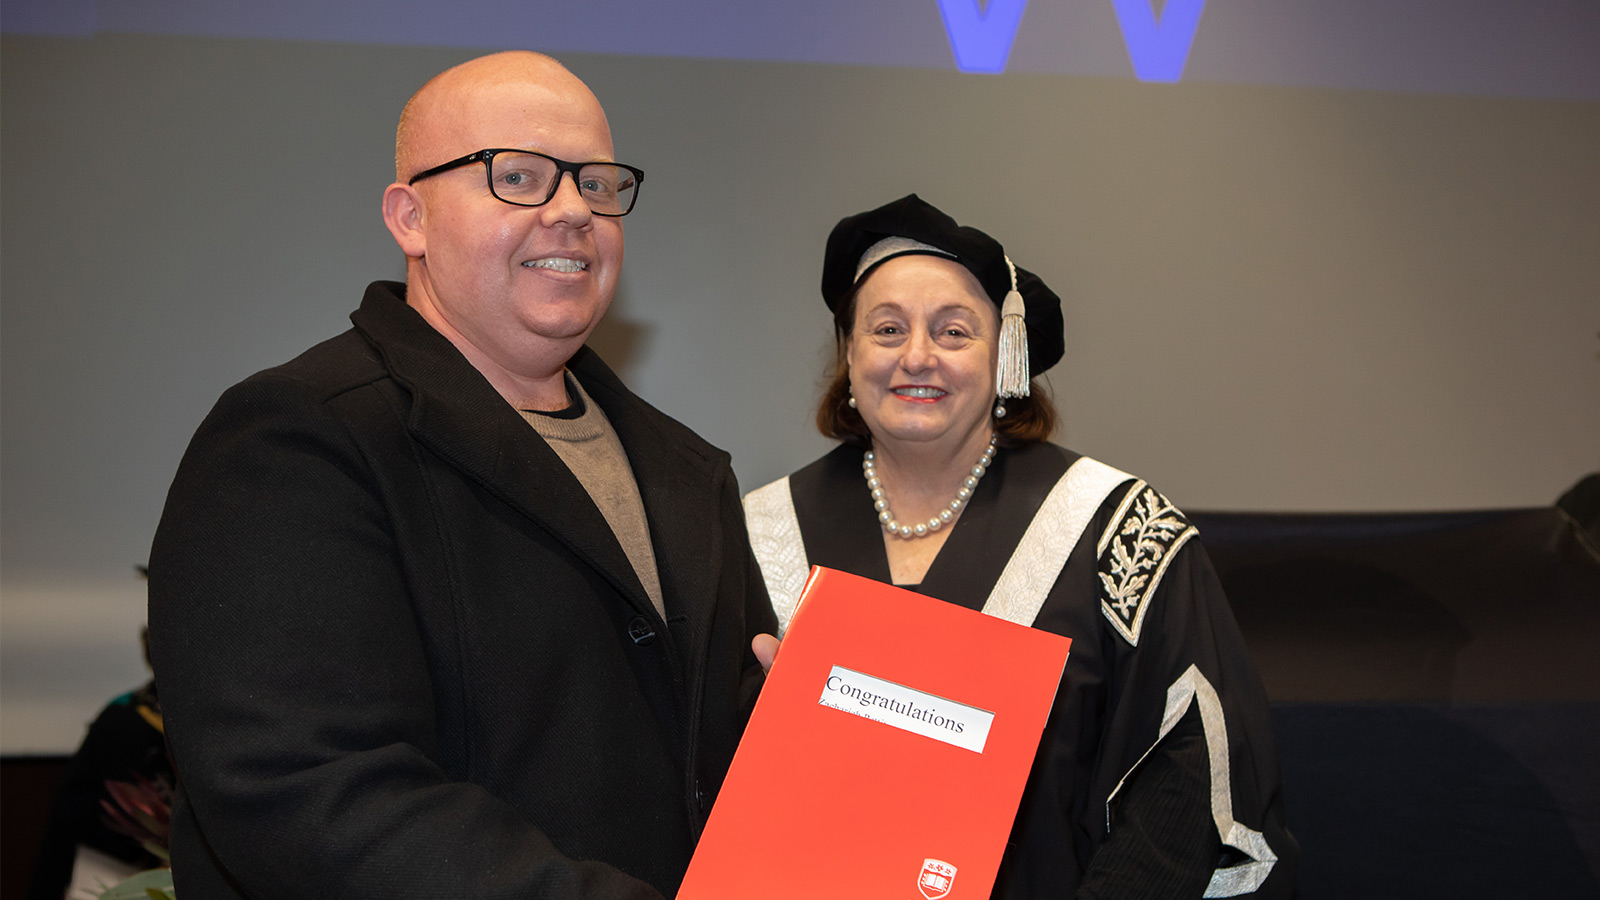 Zach Pettit is accepting a UOW College graduate certificate from Vice Chancelor Patricia Davidson